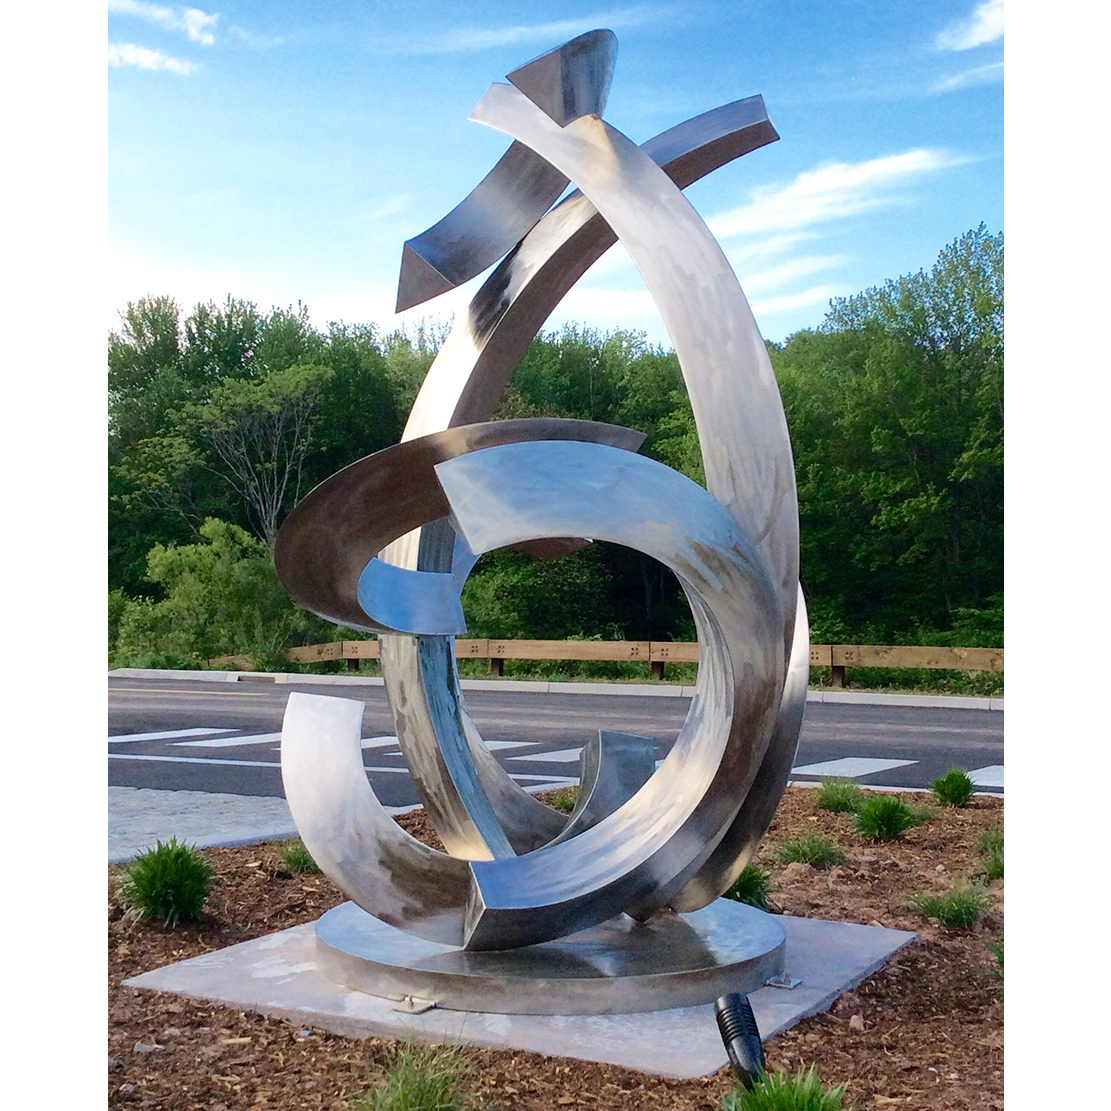 Large stainless steel sculpture